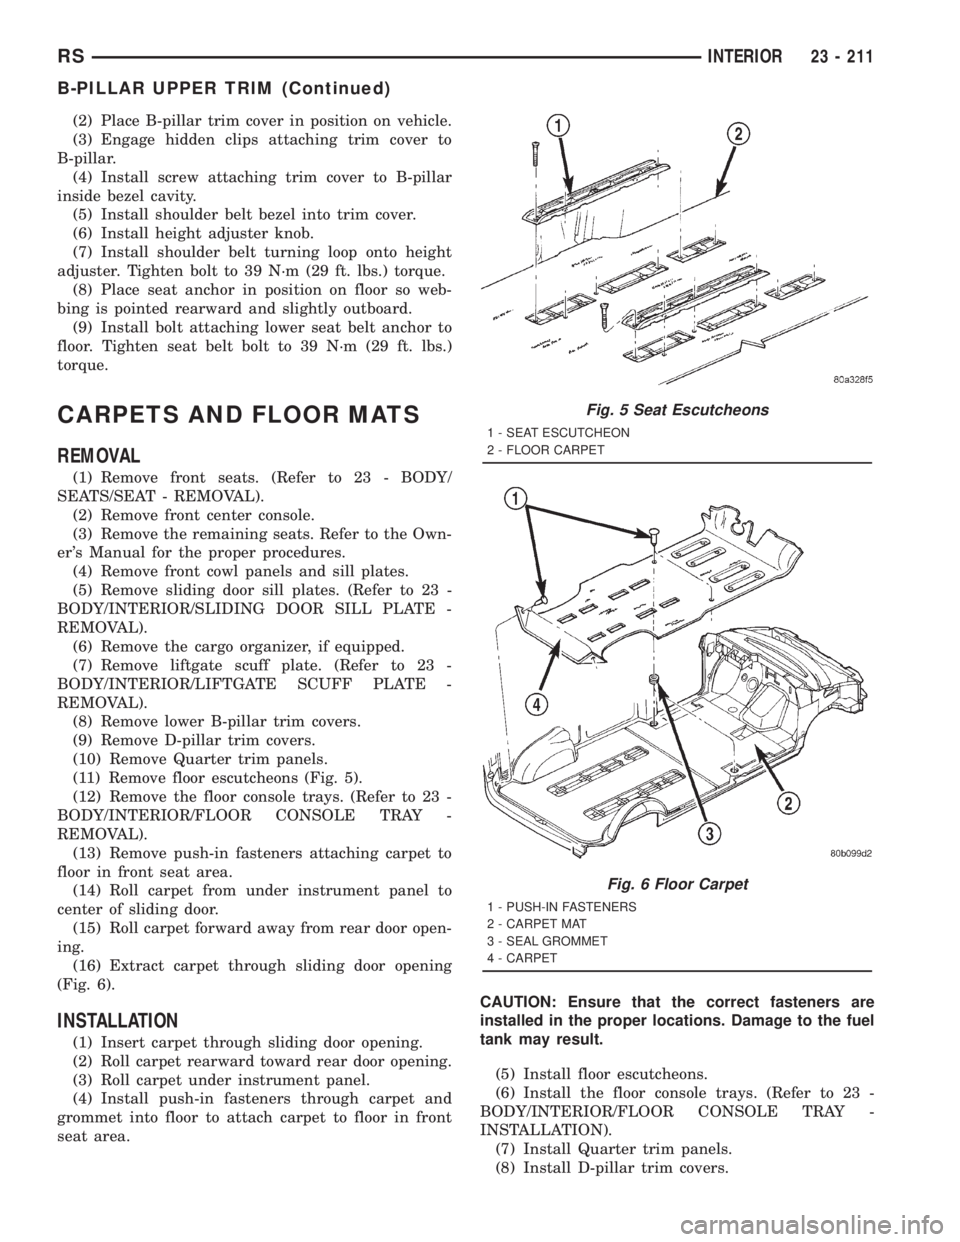 CHRYSLER VOYAGER 2001  Service Manual (2) Place B-pillar trim cover in position on vehicle.
(3) Engage hidden clips attaching trim cover to
B-pillar.
(4) Install screw attaching trim cover to B-pillar
inside bezel cavity.
(5) Install shou